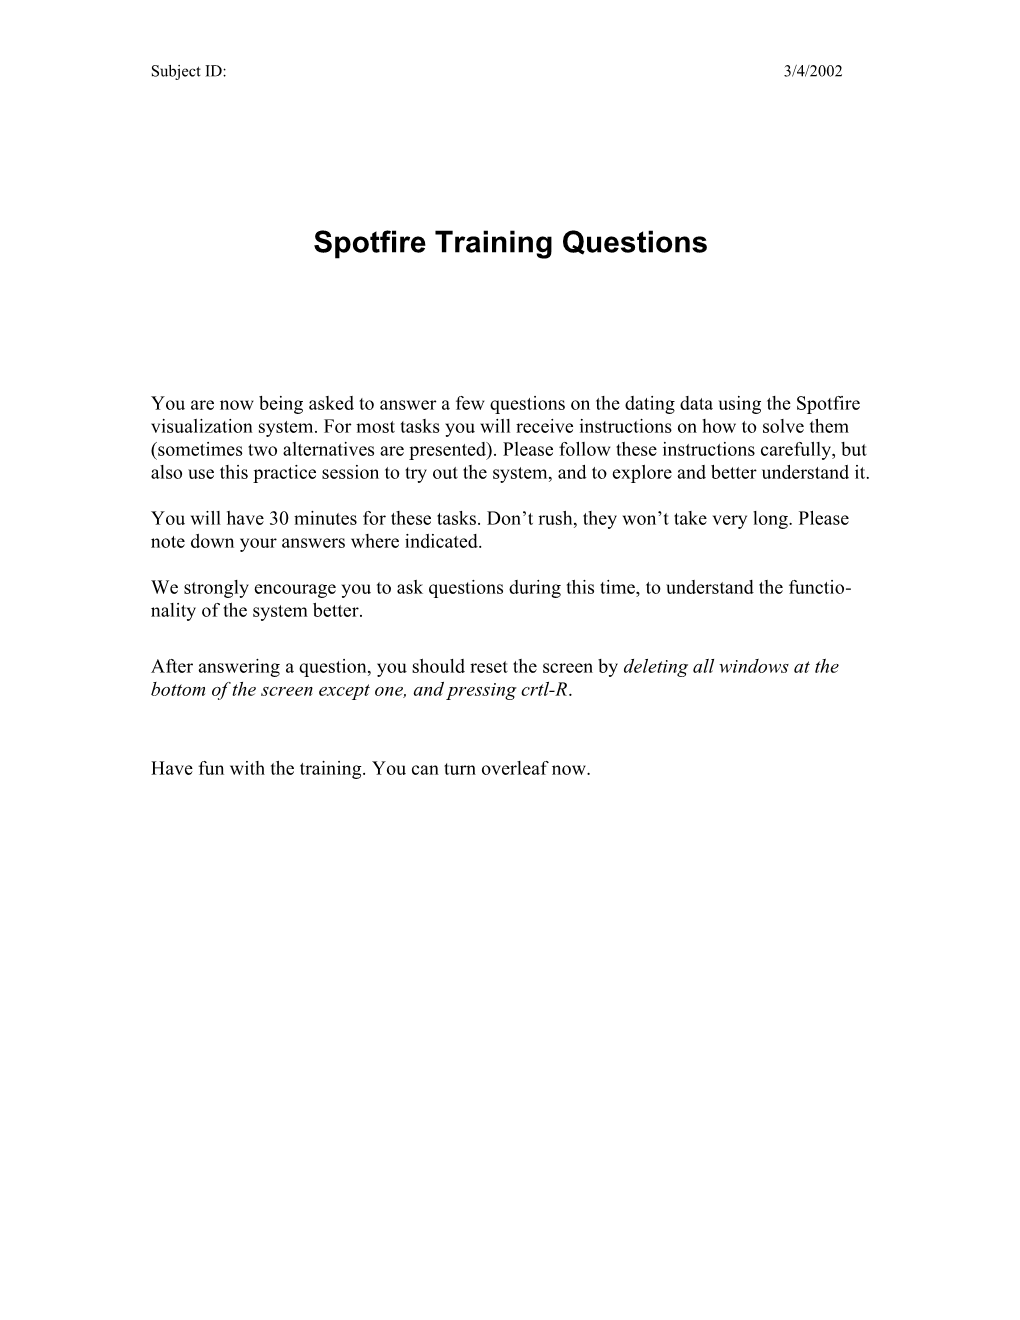 Spotfire Training Questions